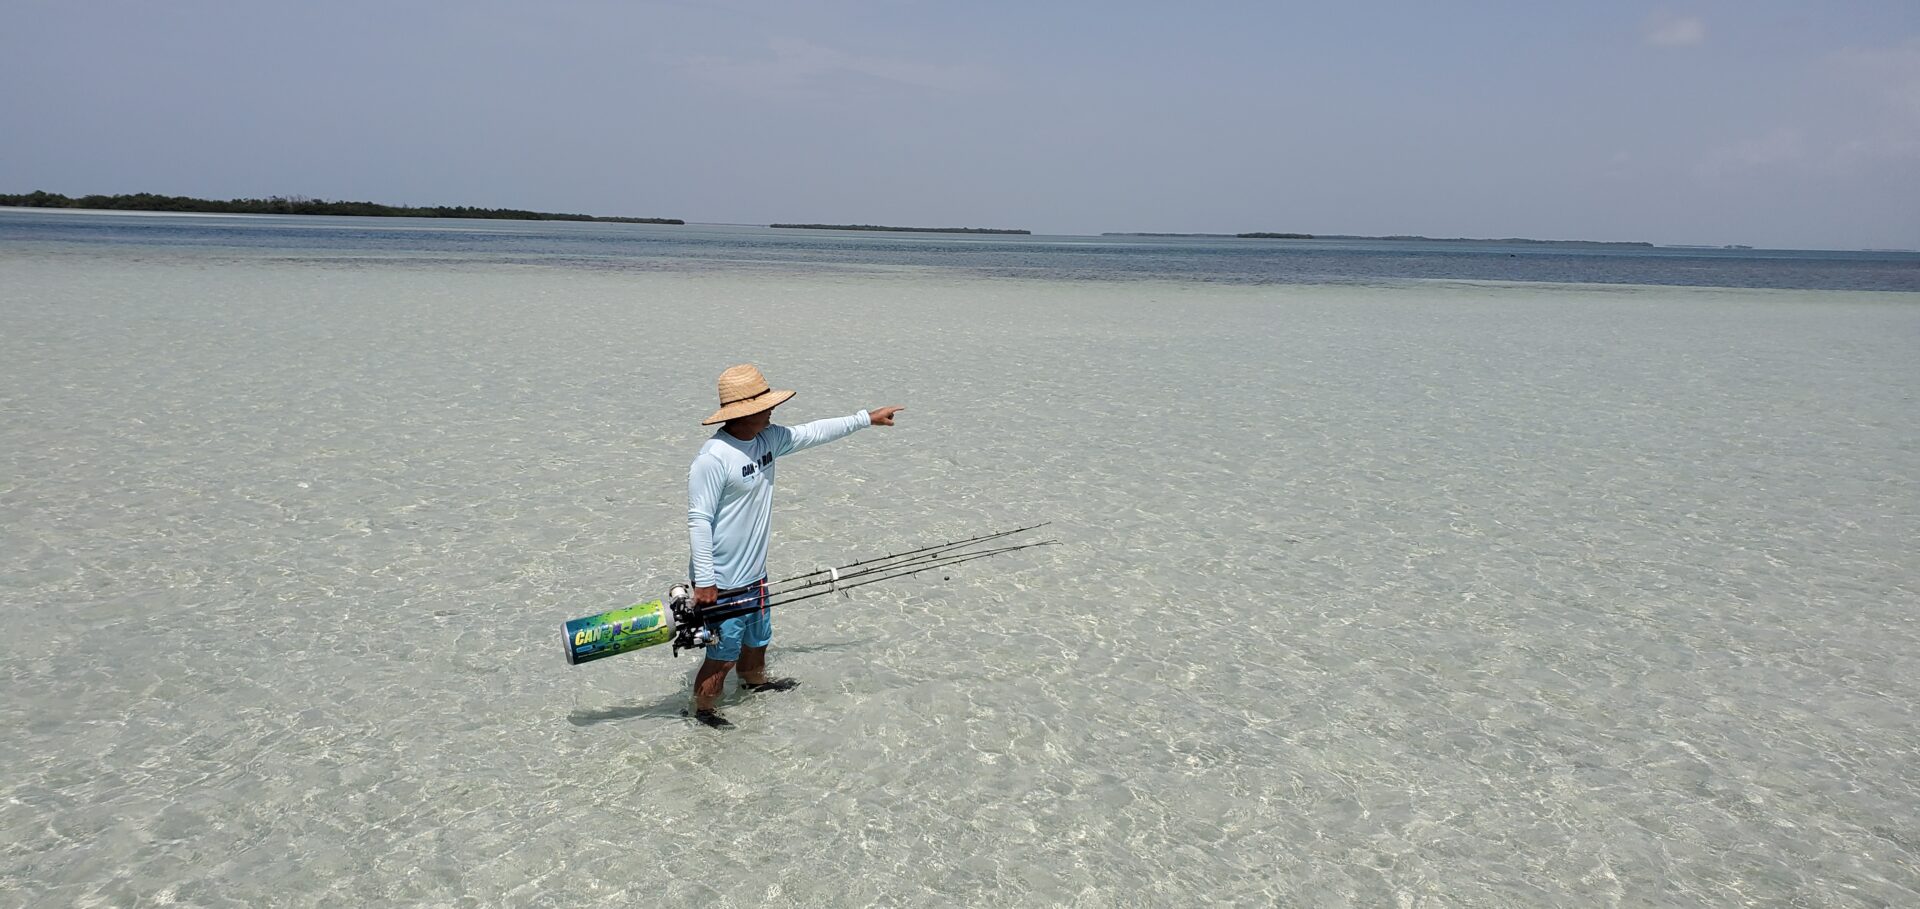 A man standing on the beach holding a kite.